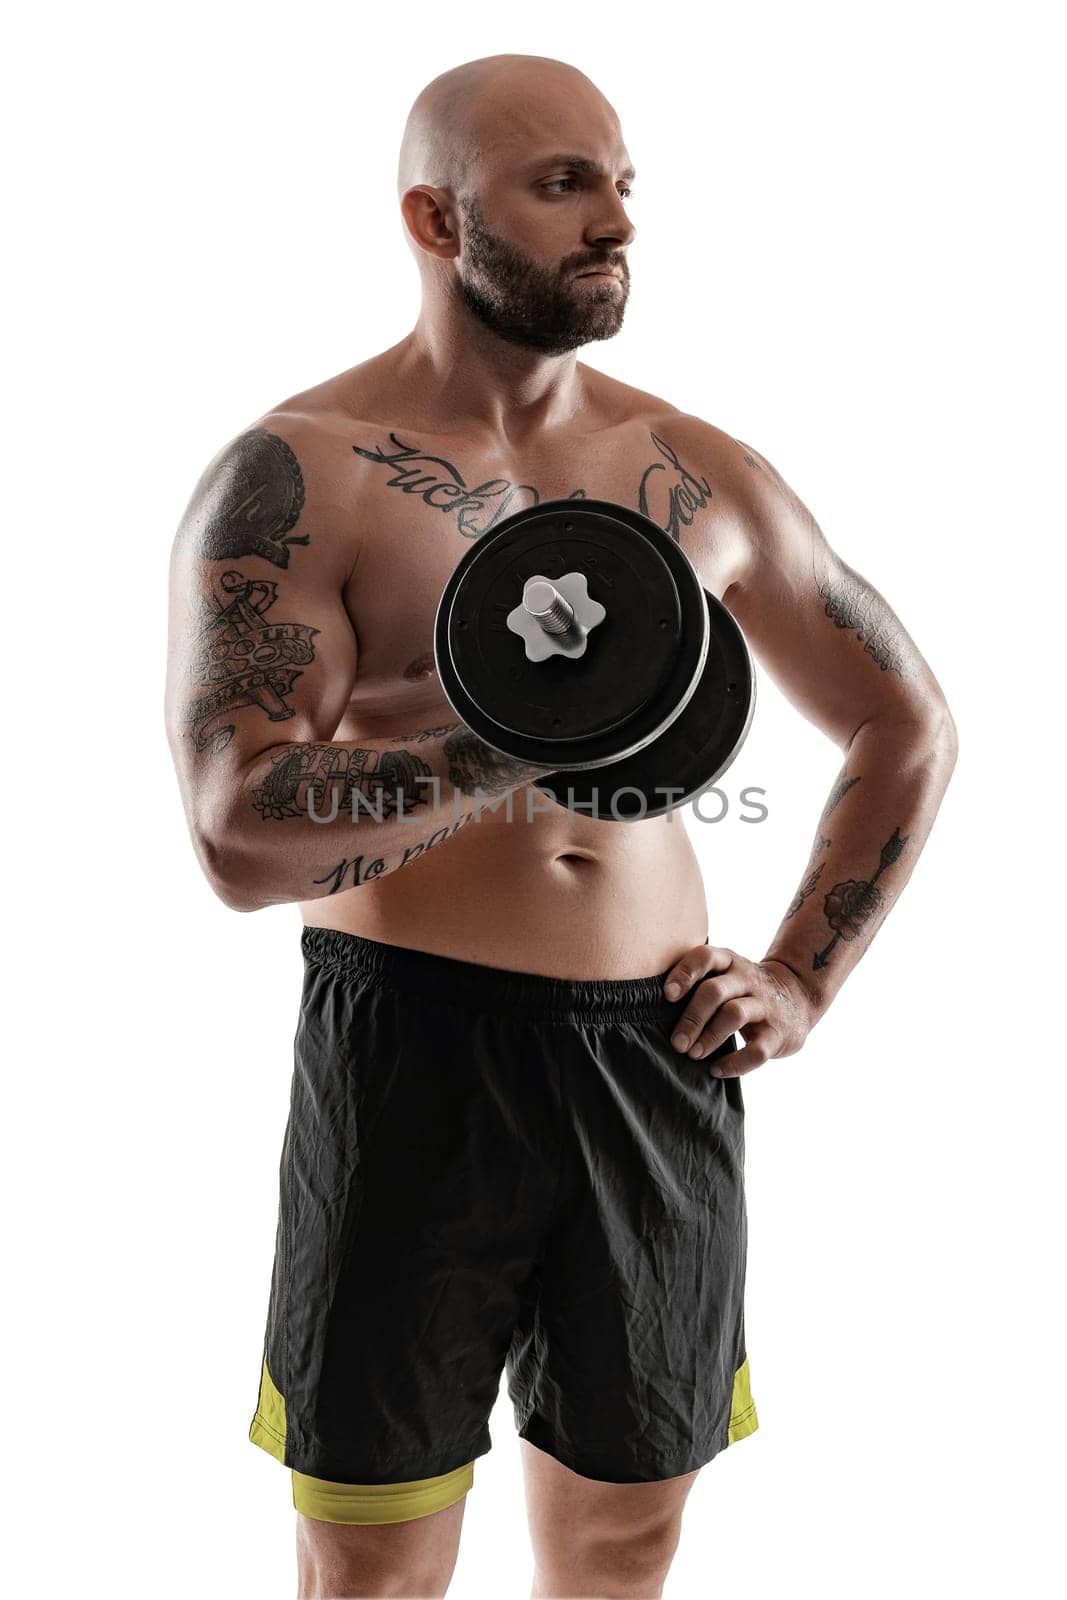 Good-looking bald, bearded, tattooed man in black shorts is posing holding a dumbbell in his hand and looking away, isolated on white background . Chic muscular body, fitness, gym, healthy lifestyle concept. Close-up portrait.